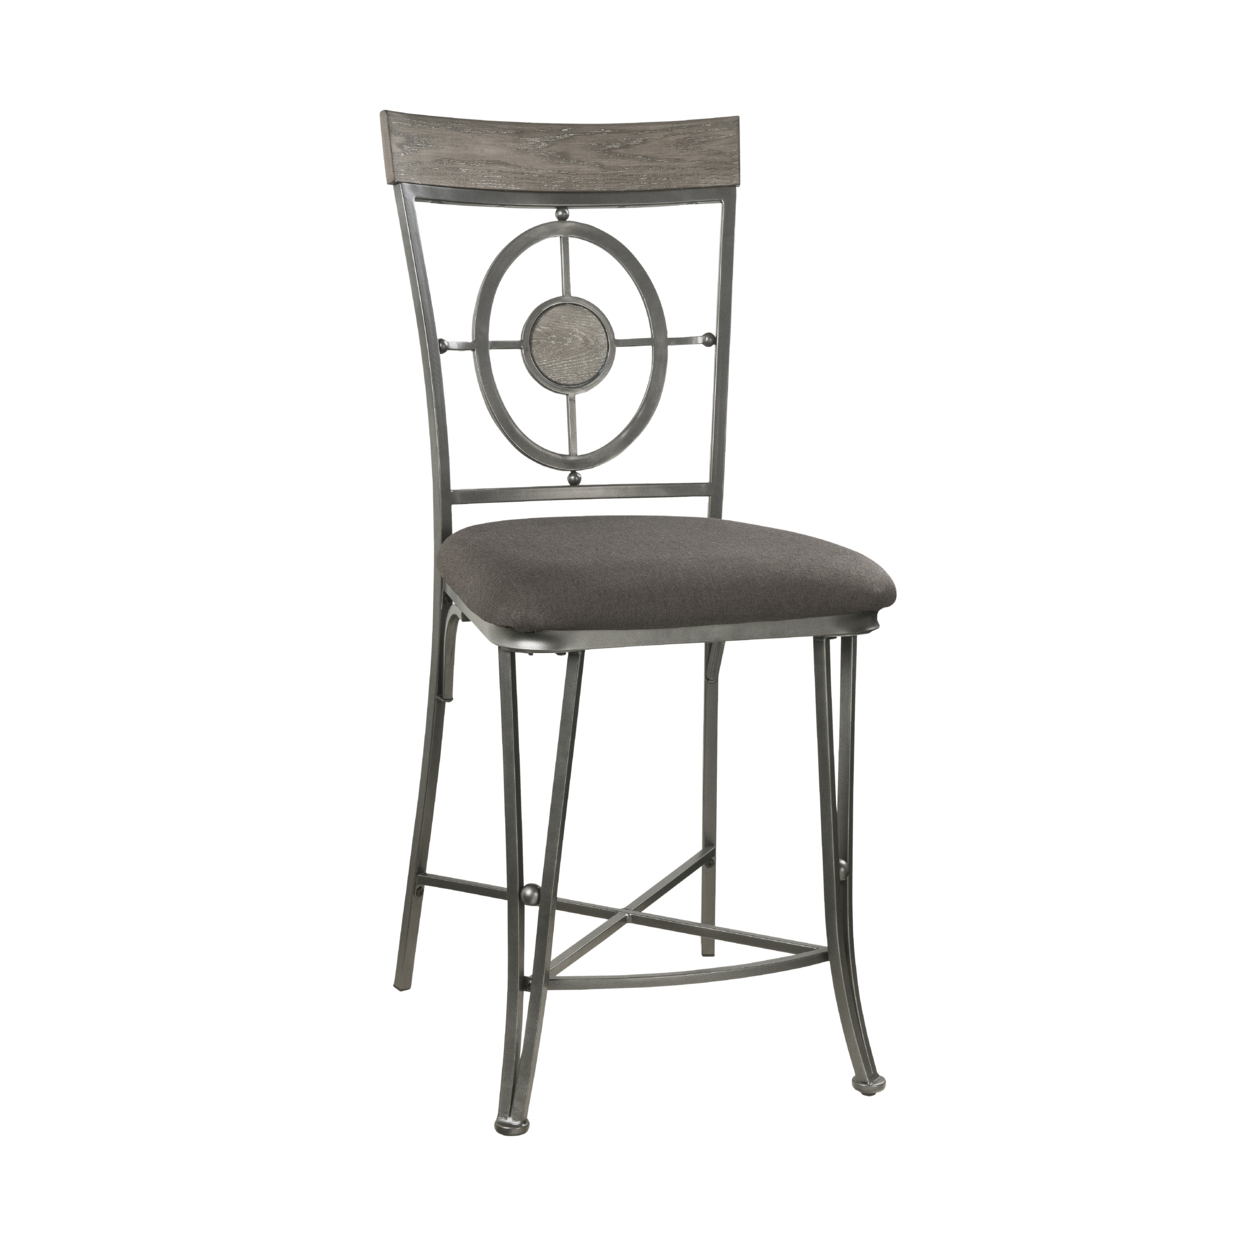 Counter Height Metal Chair With Geometrical Backrest, Set Of 2, Gray- Saltoro Sherpi